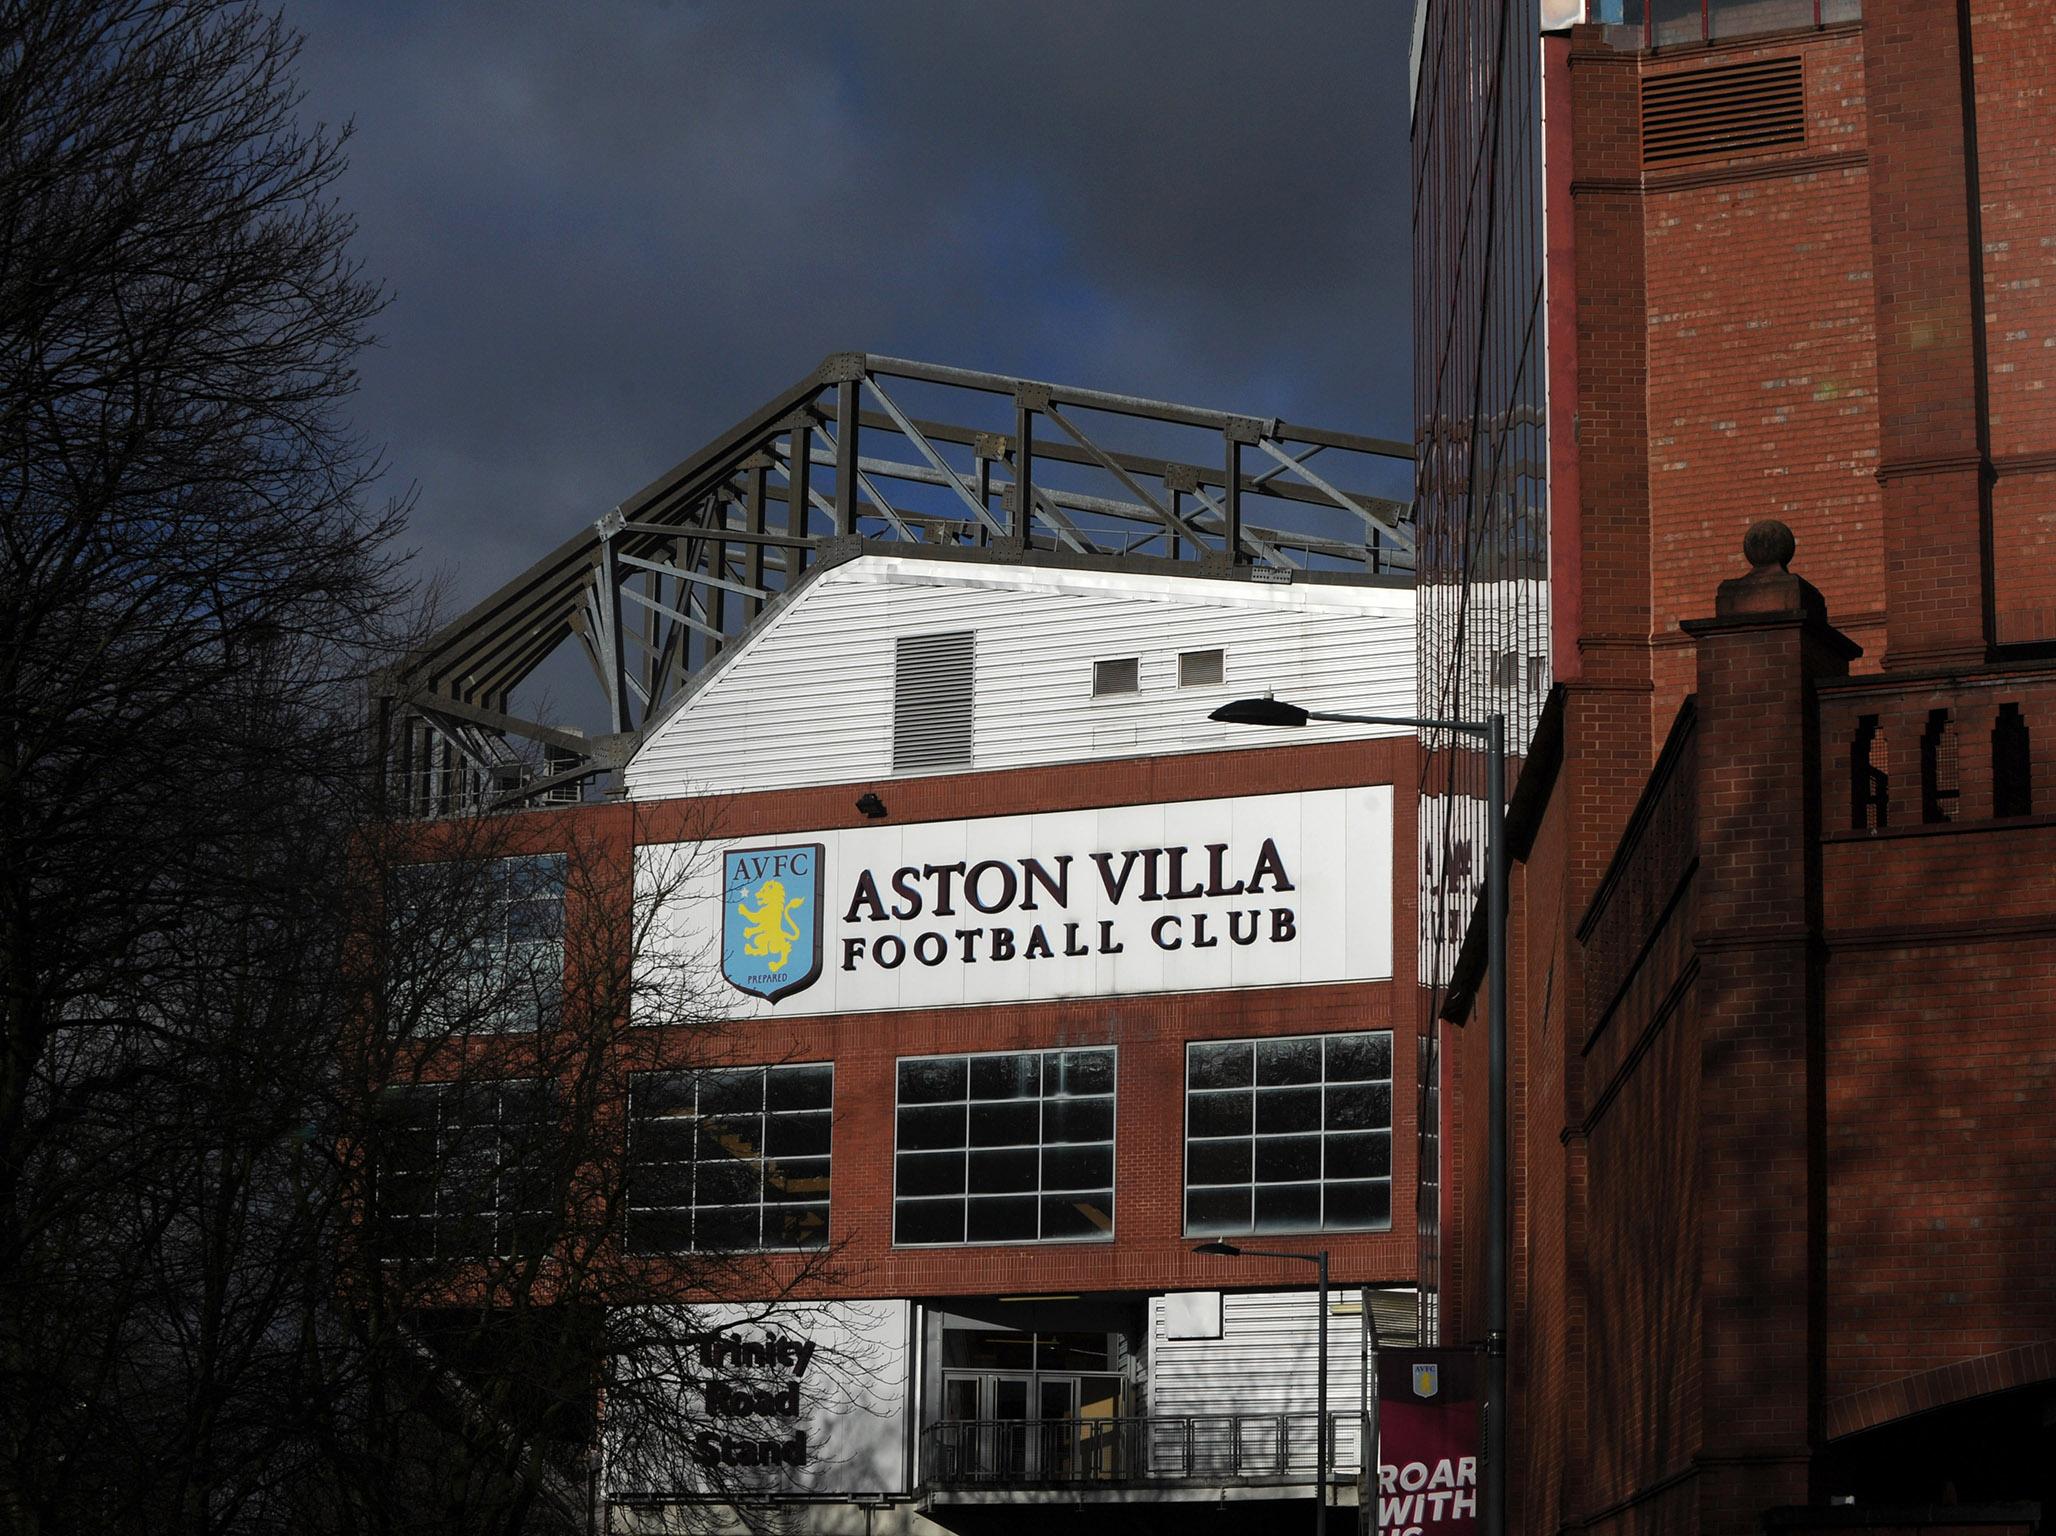 Aston Villa are one of English football’s oldest clubs